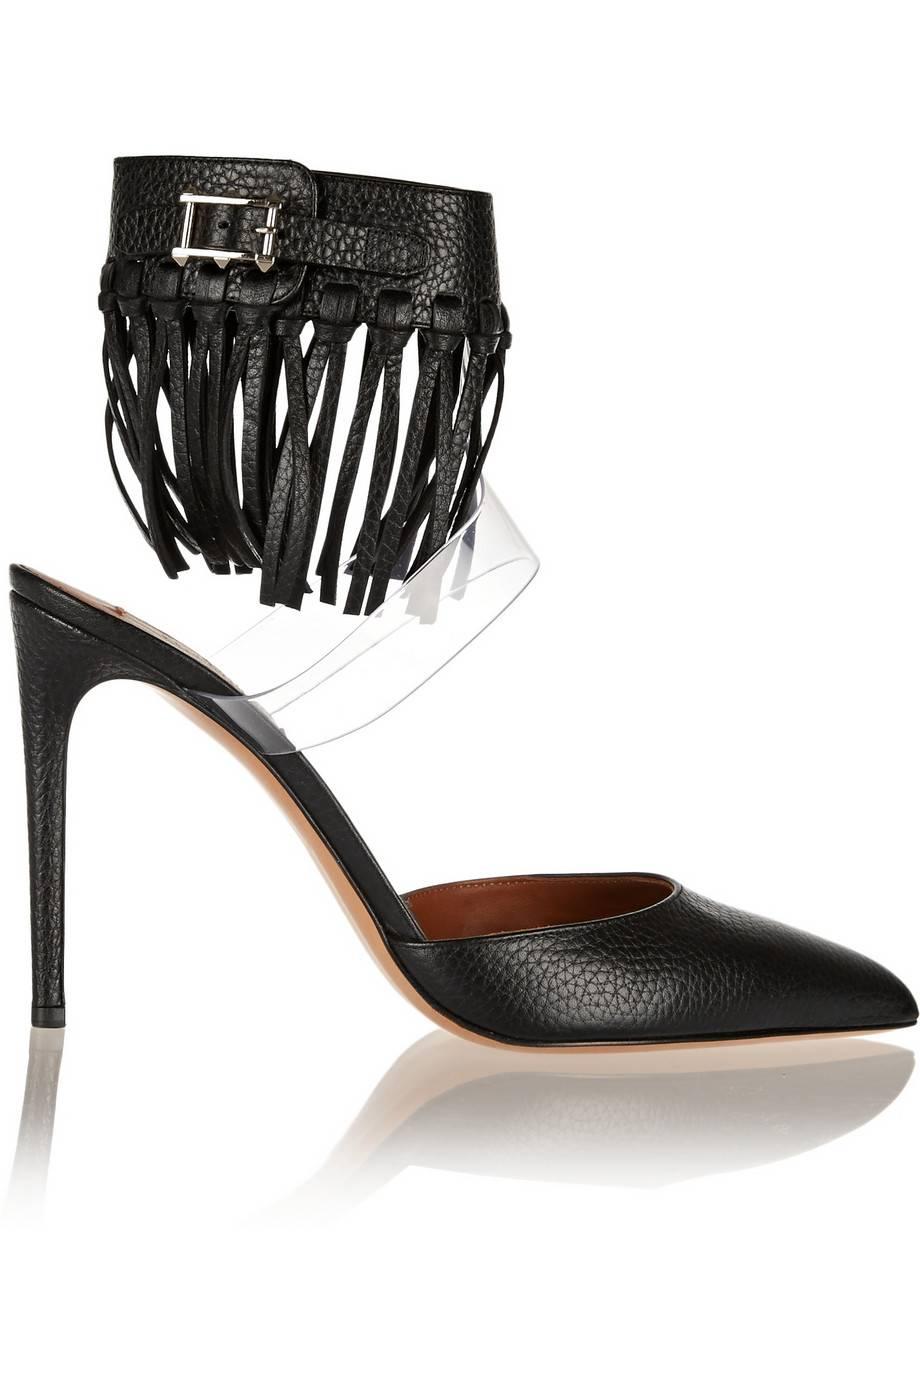 Valentino Black Leather Fringe PVC Pointy Ankle Sandal Heels Shoes in Box In New Condition In Chicago, IL